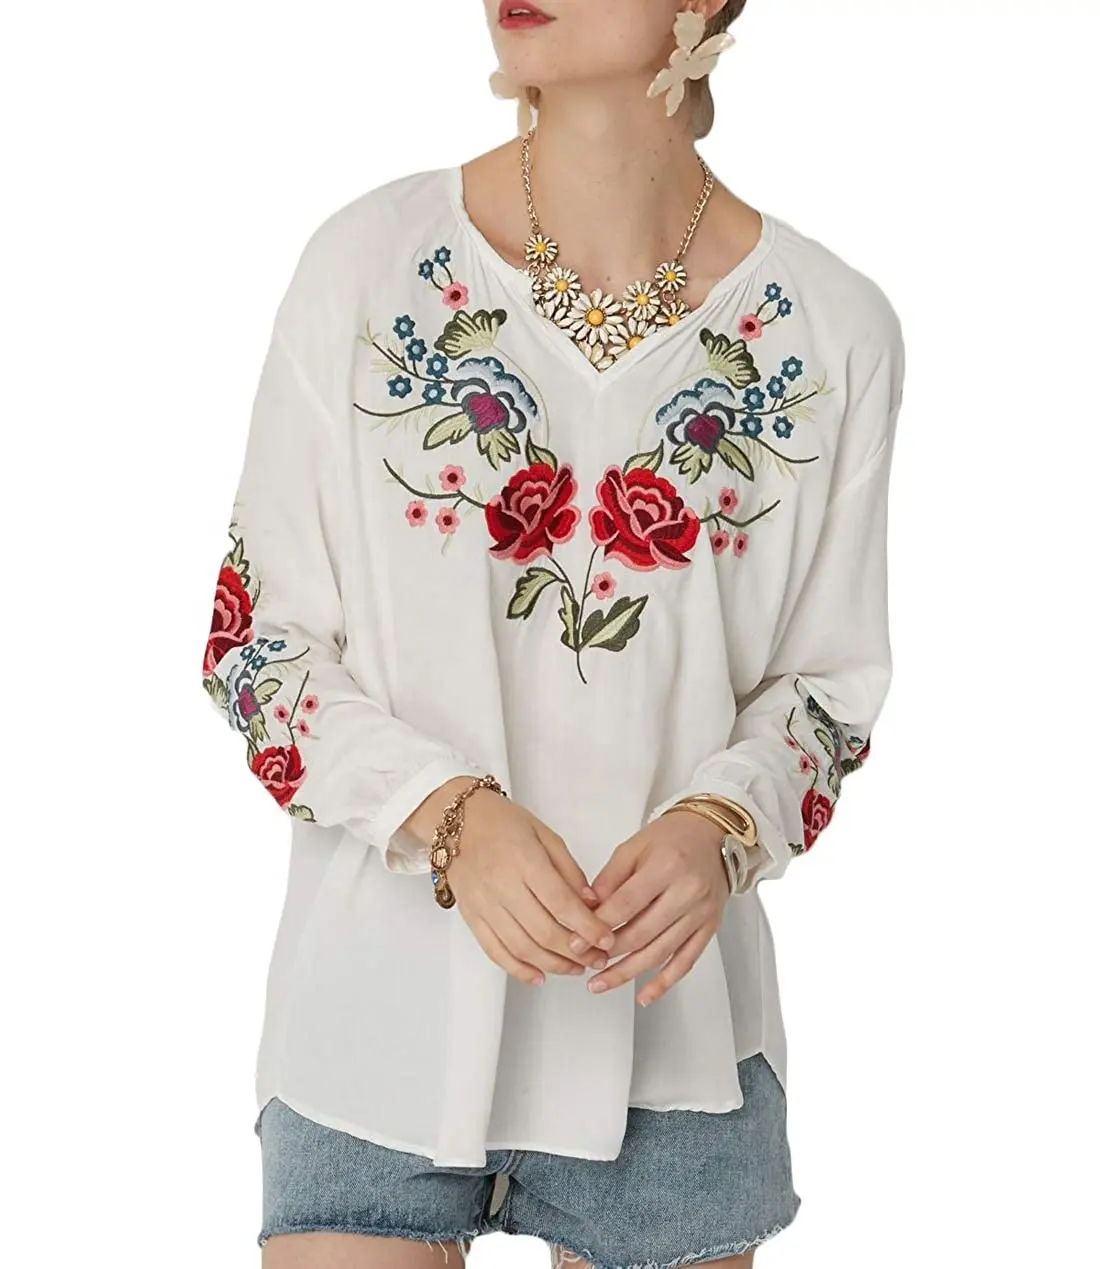 Best selling Womens Embroidered Rose Mexican Peasant Shirts Cotton Long Sleeve Loose Tops Blouse